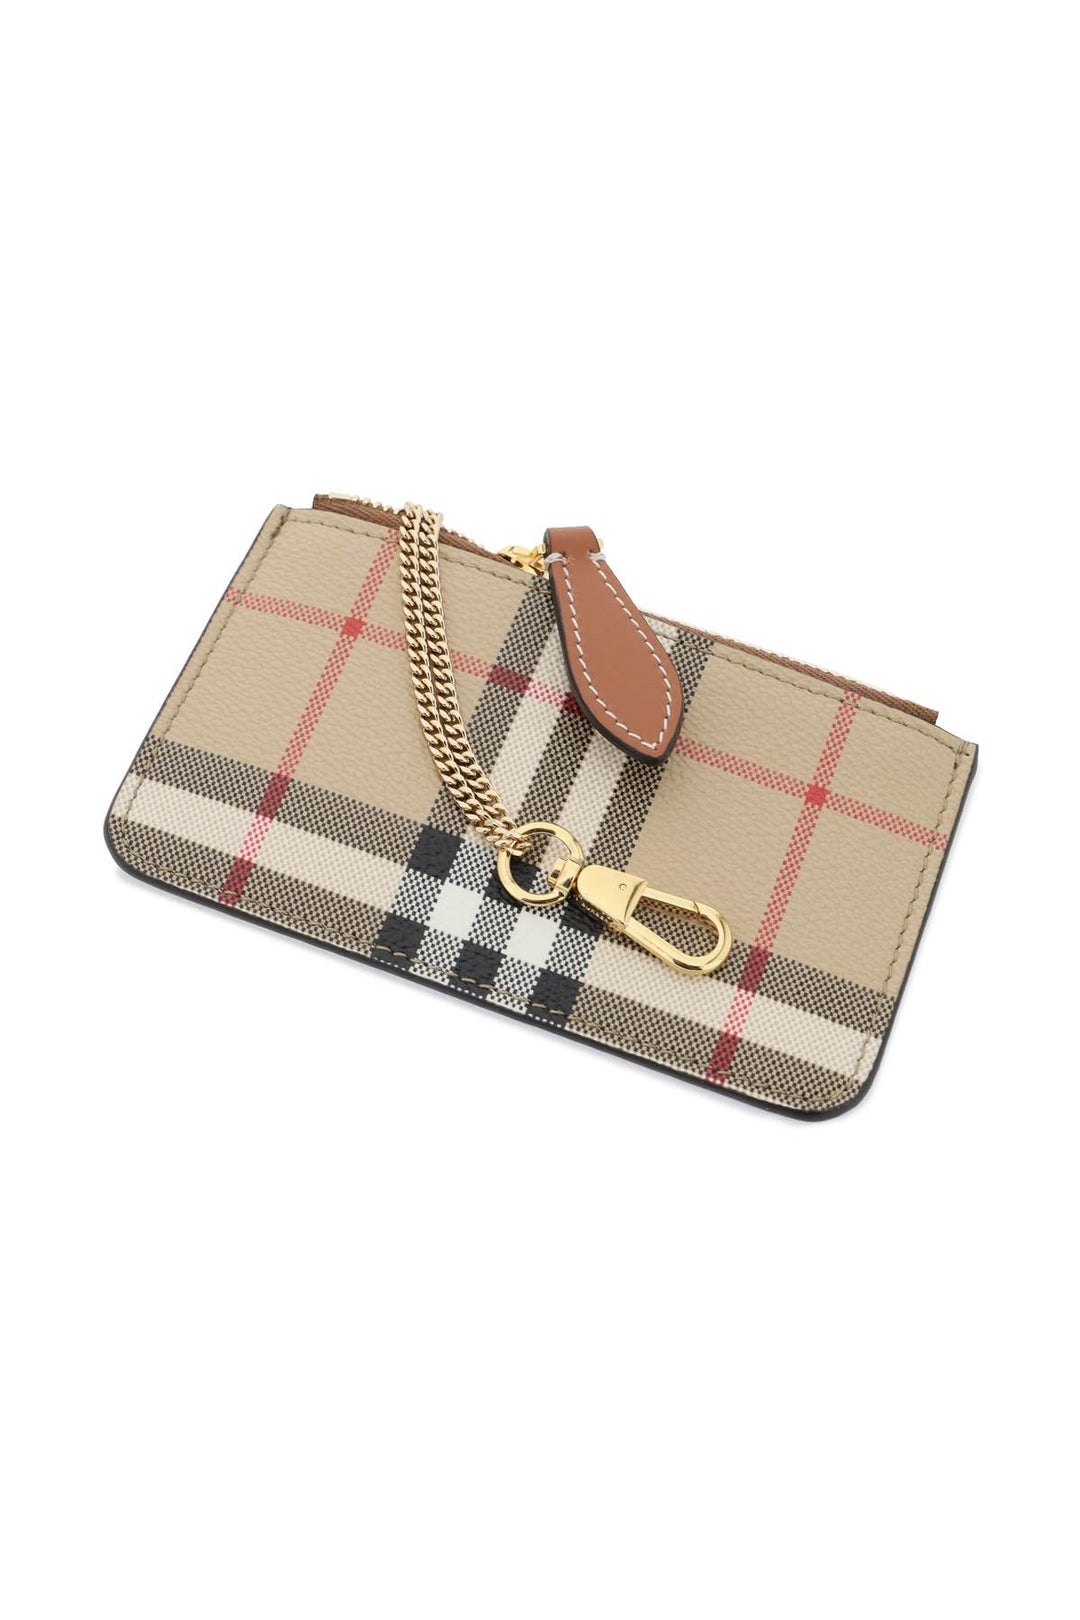 Burberry Check Coin Purse With Chain Strap   Beige